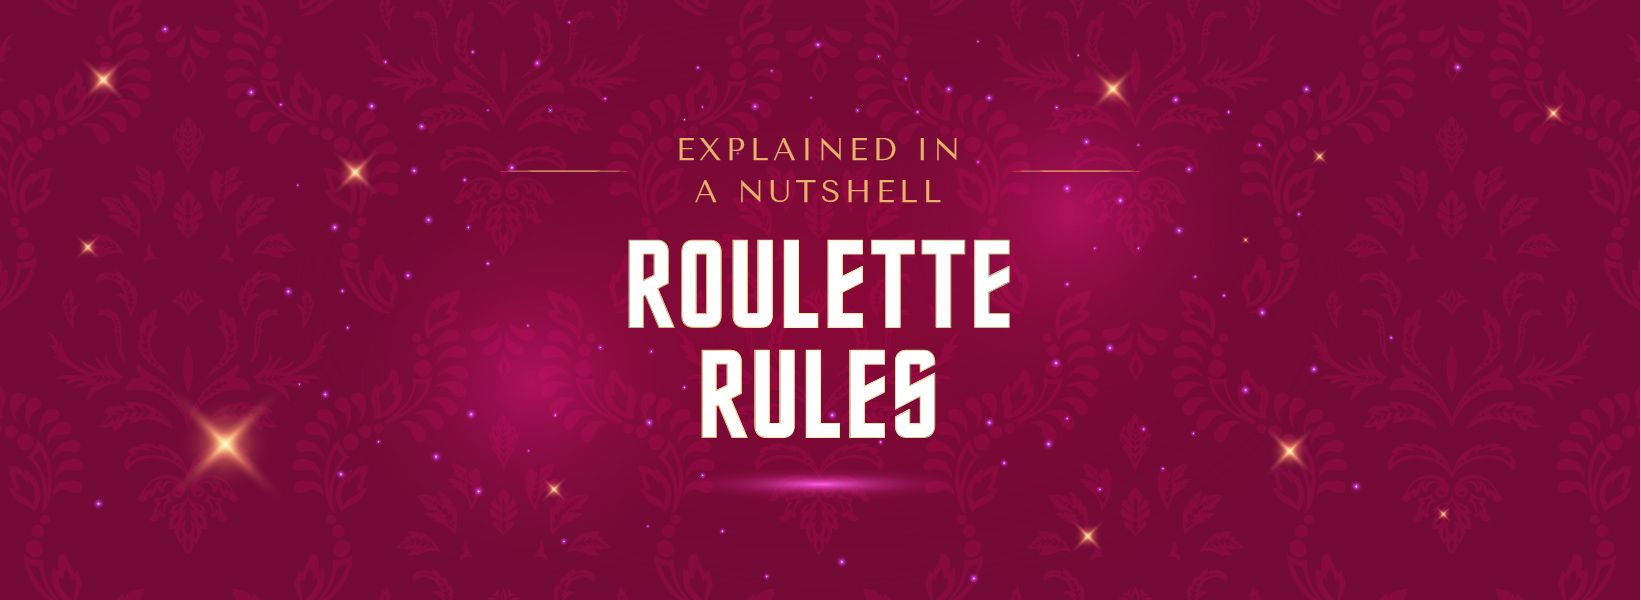 Roulette rules explained